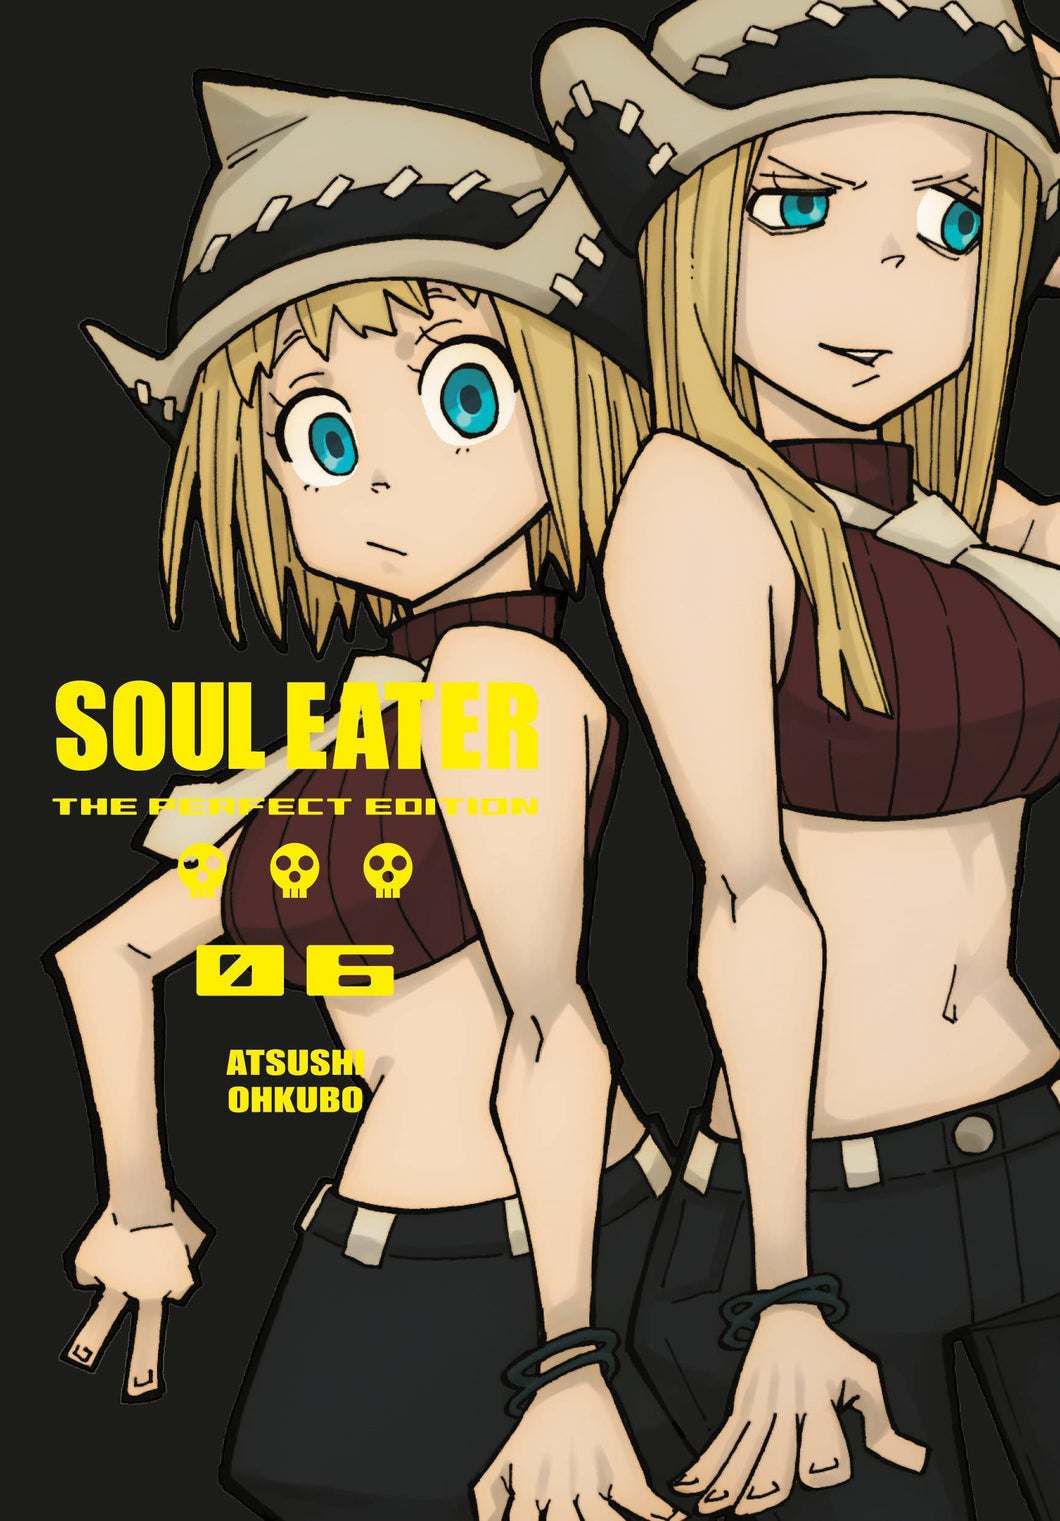 Soul Eater: The Perfect Edition Volume 6